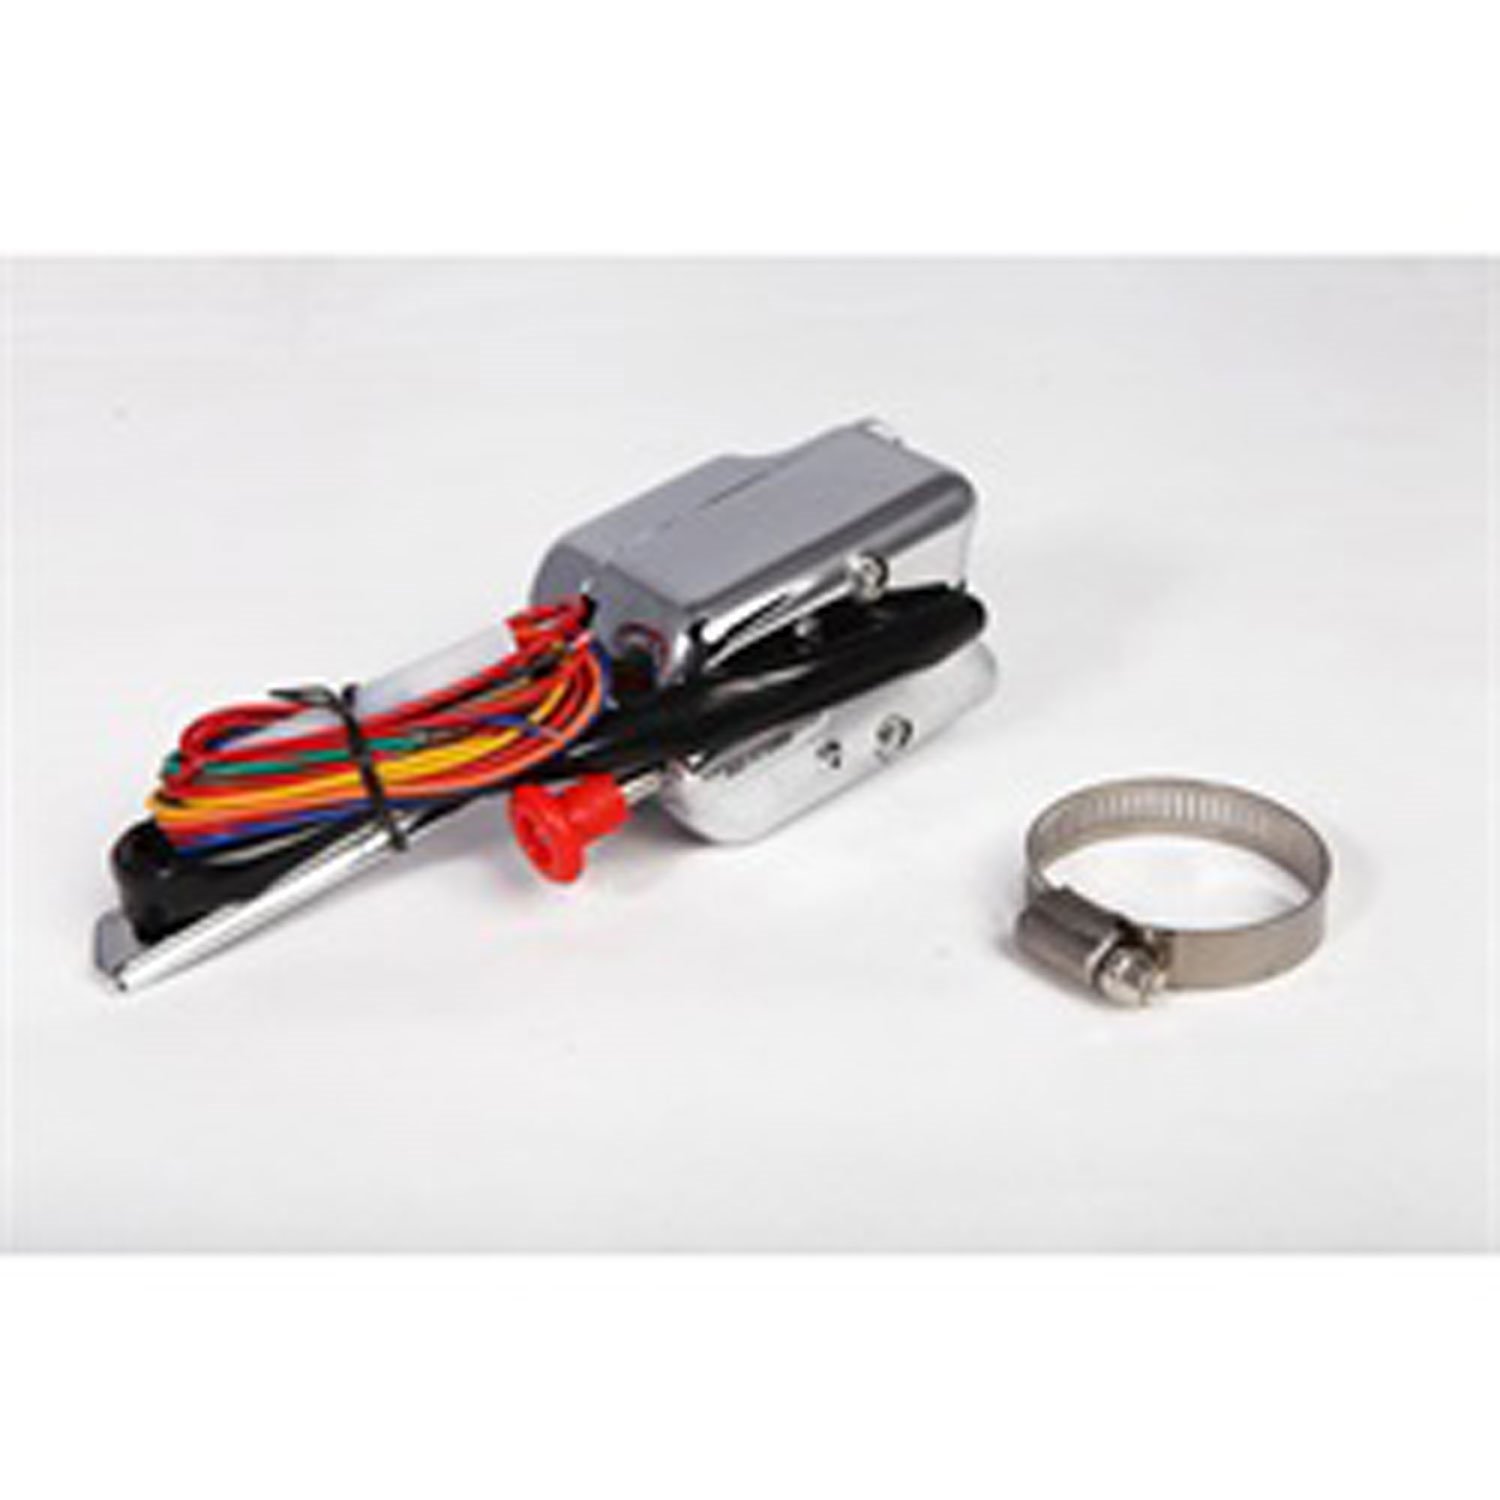 Chrome replacement turn signal switch kit from Omix-ADA